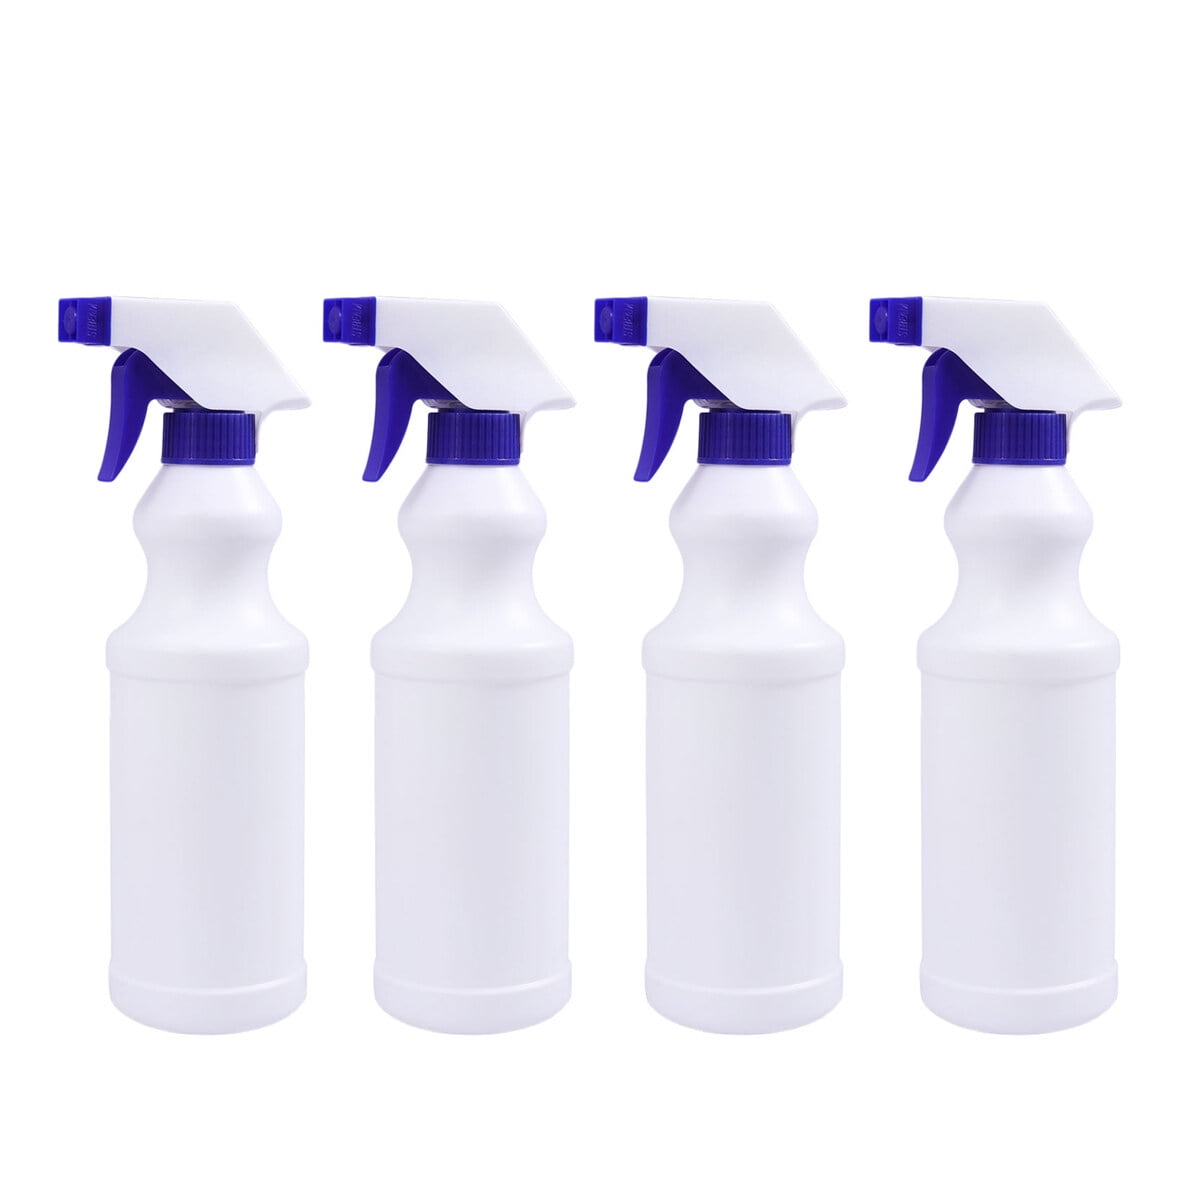 EZPRO USA Transparent Empty Spray Bottles 24oz 3 Pack, Industrial Sprayer, Heavy-Duty Spray for Hair, Pet Grooming Cat Training, Auto Car Detailing, Cleaning Janitorial